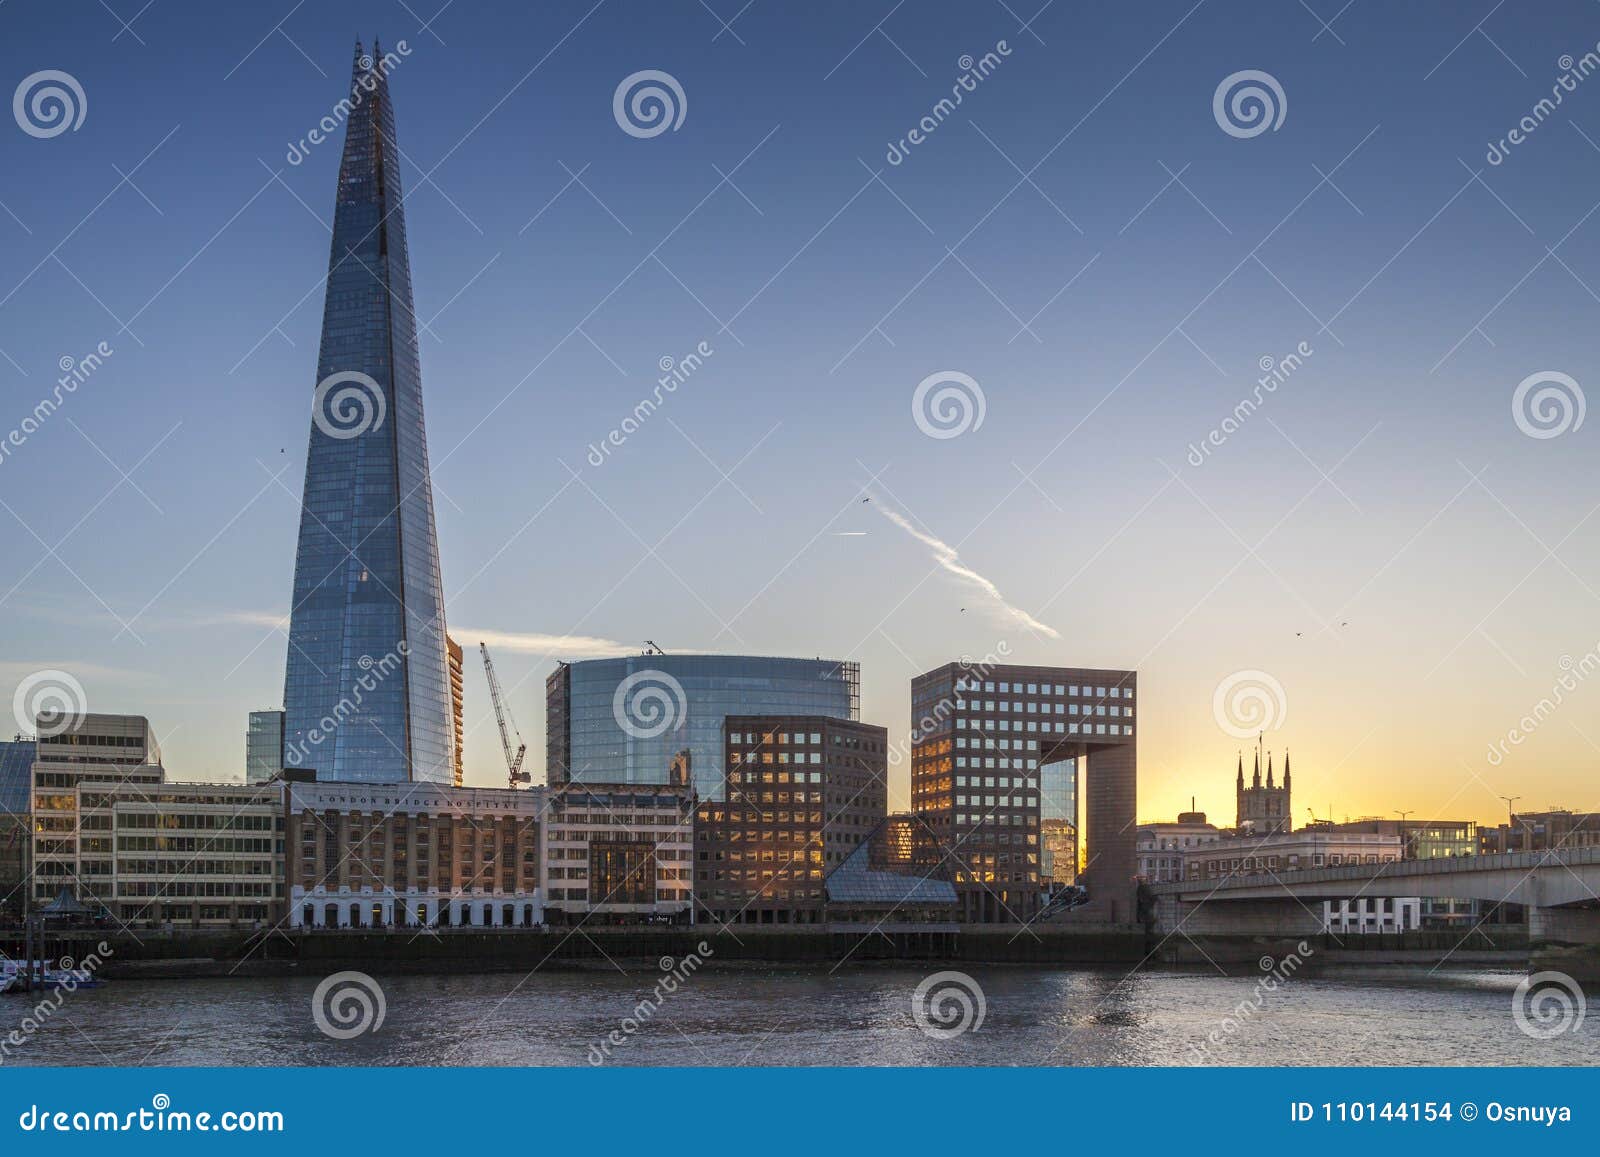 the shard and london bridge by river thames during sunset